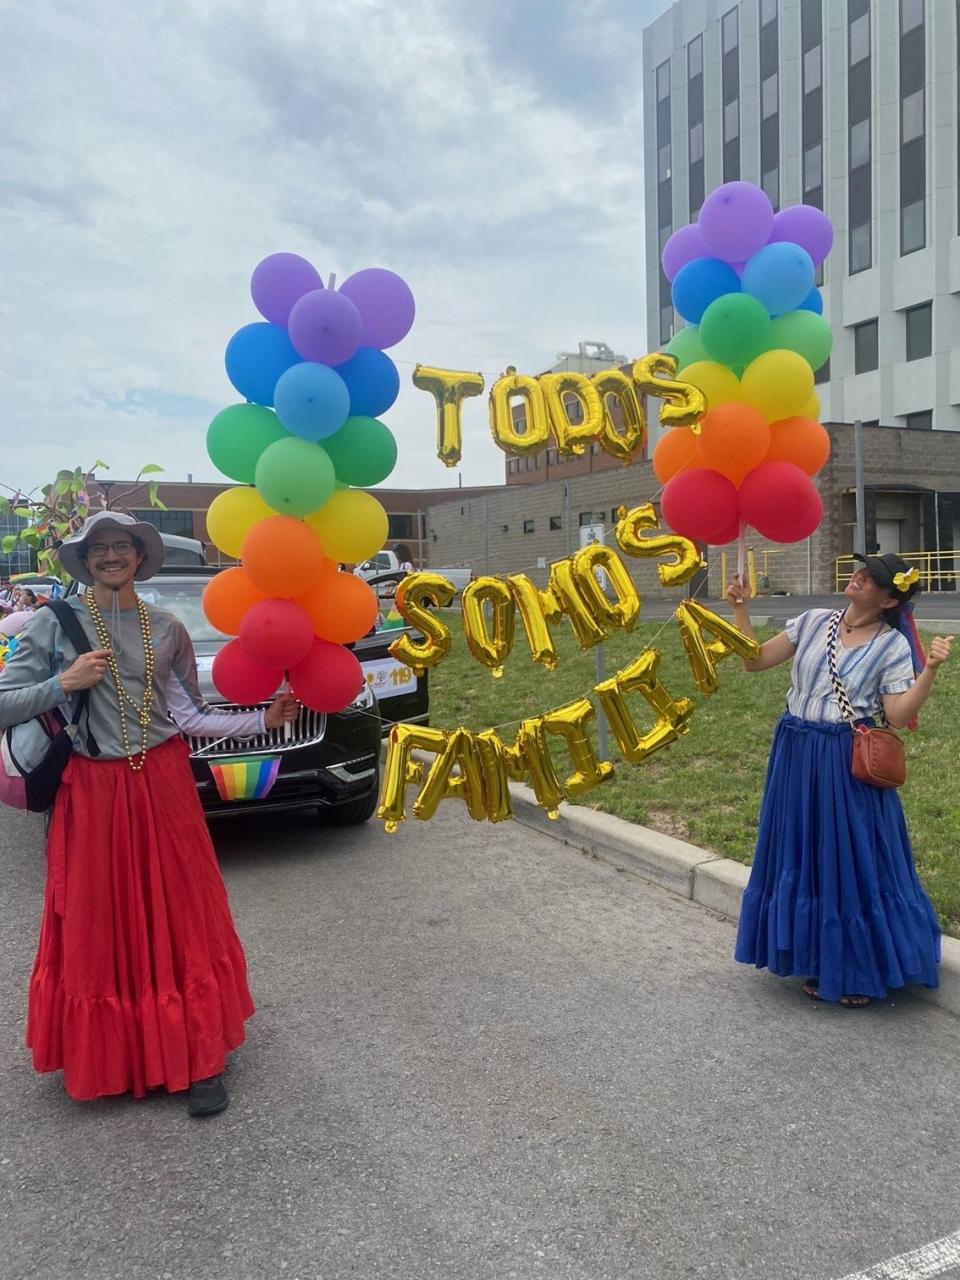 "TODOS SOMOS FAMILIA," which in English translates to "We Are All Family," is a message carried by Grupo Cultural Latinos in the 2023 Rochester Pride Parade on Saturday, July 15. At left is Phillip Guingona, and at right is Ling Ma.